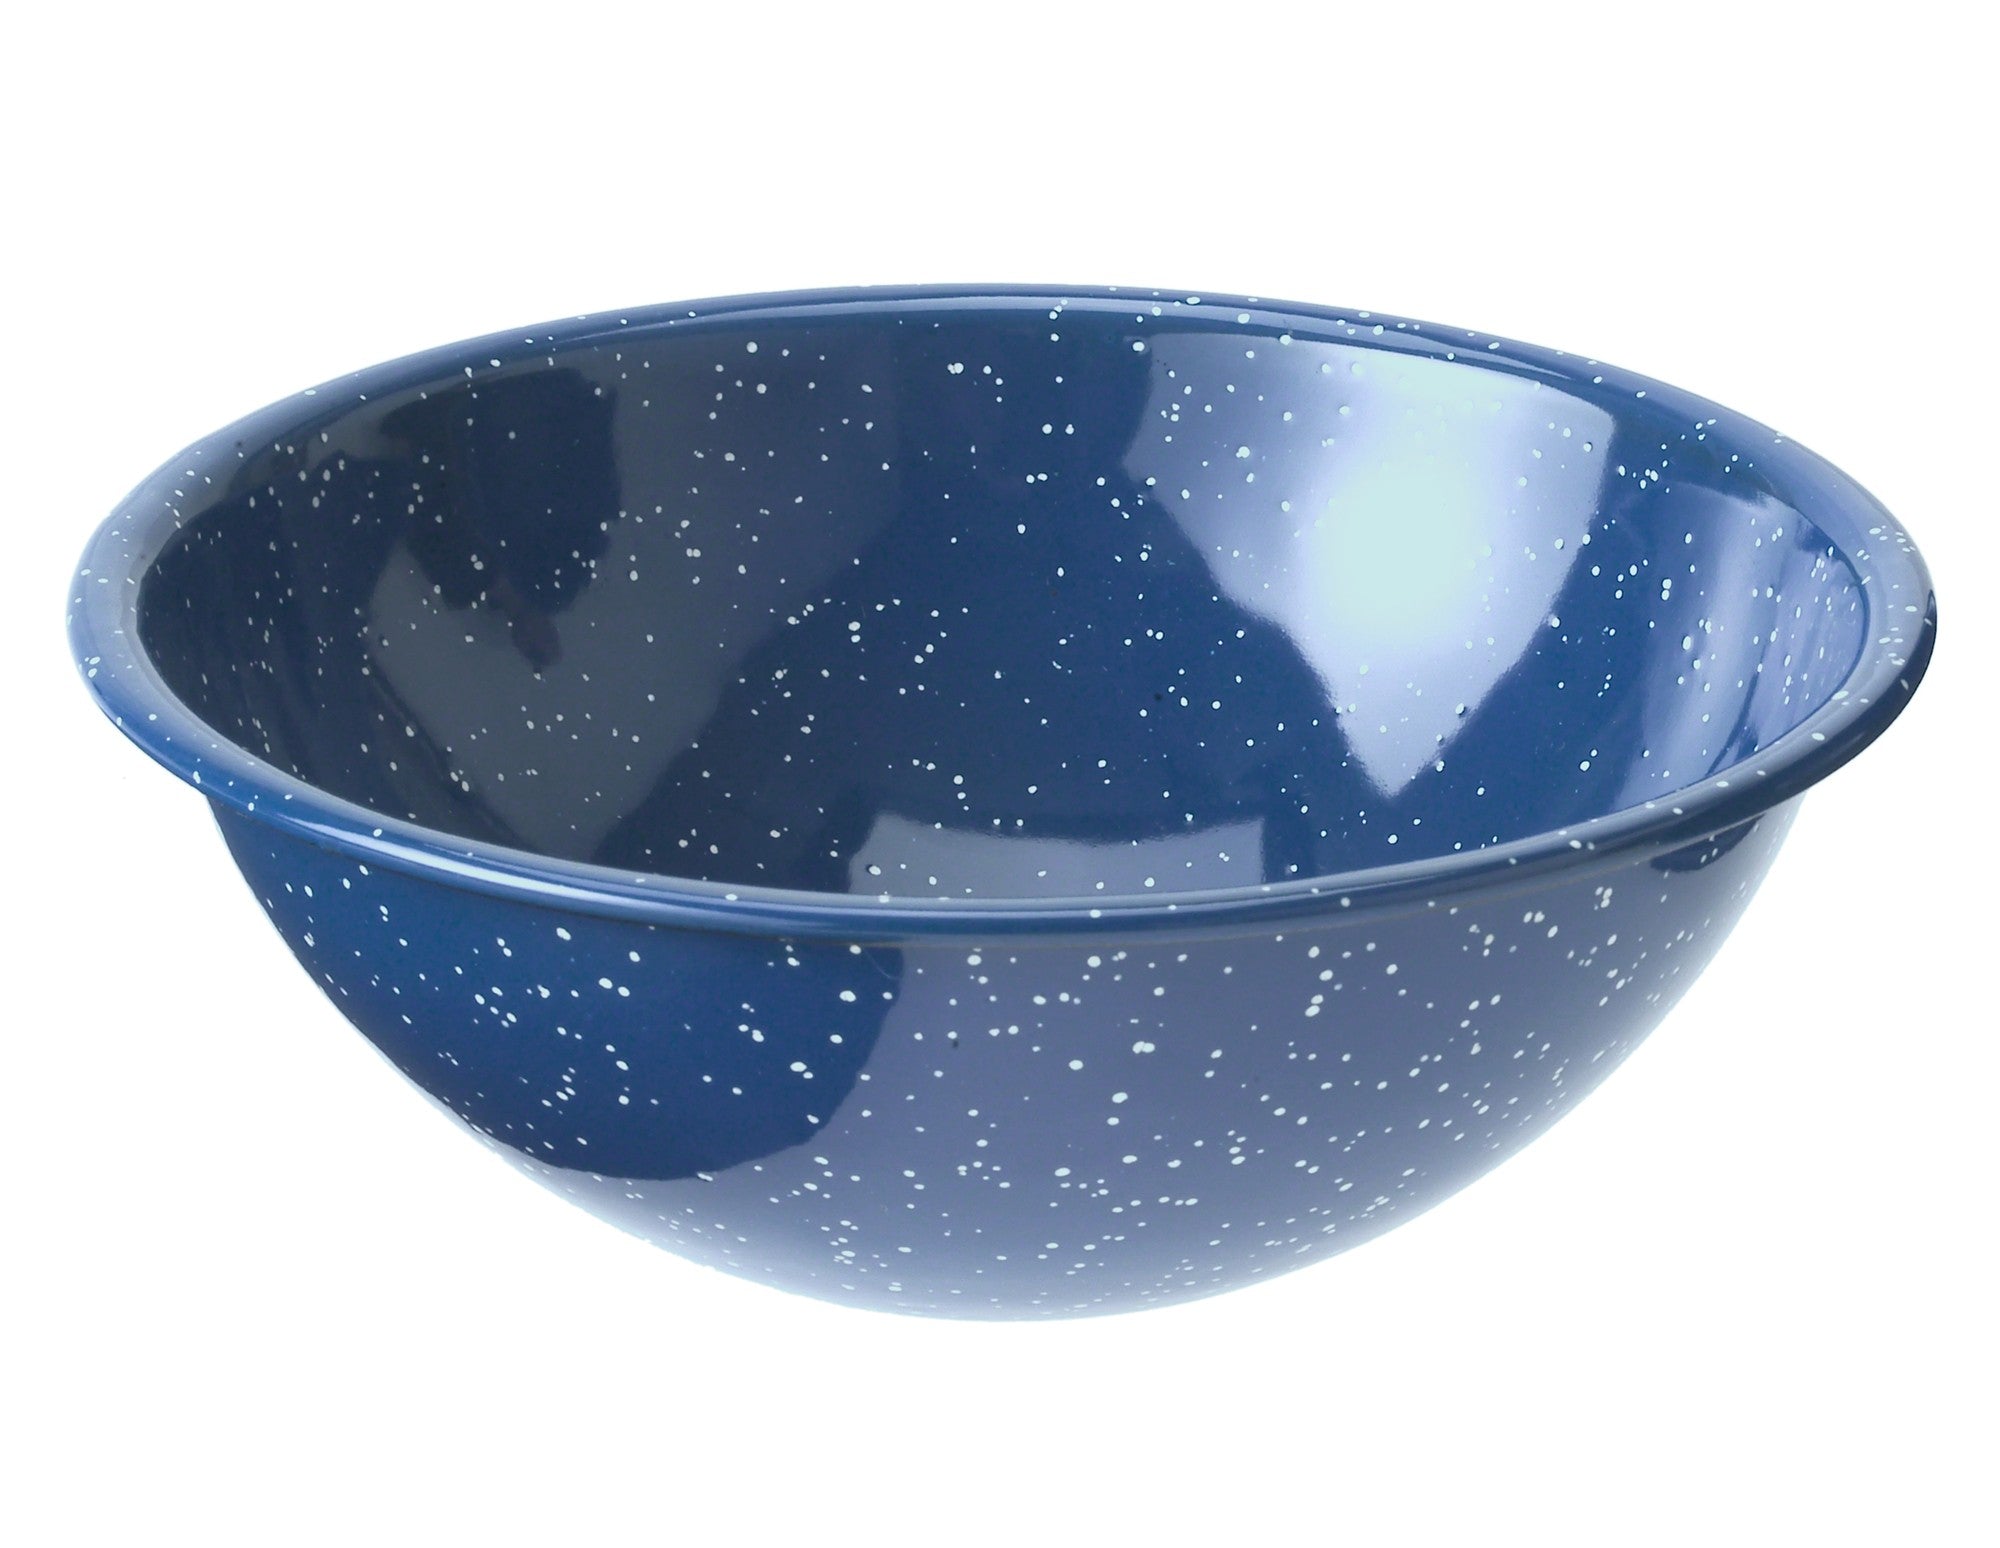 7 Blue Enamelware Mixing Bowl for Outdoor Dining Set